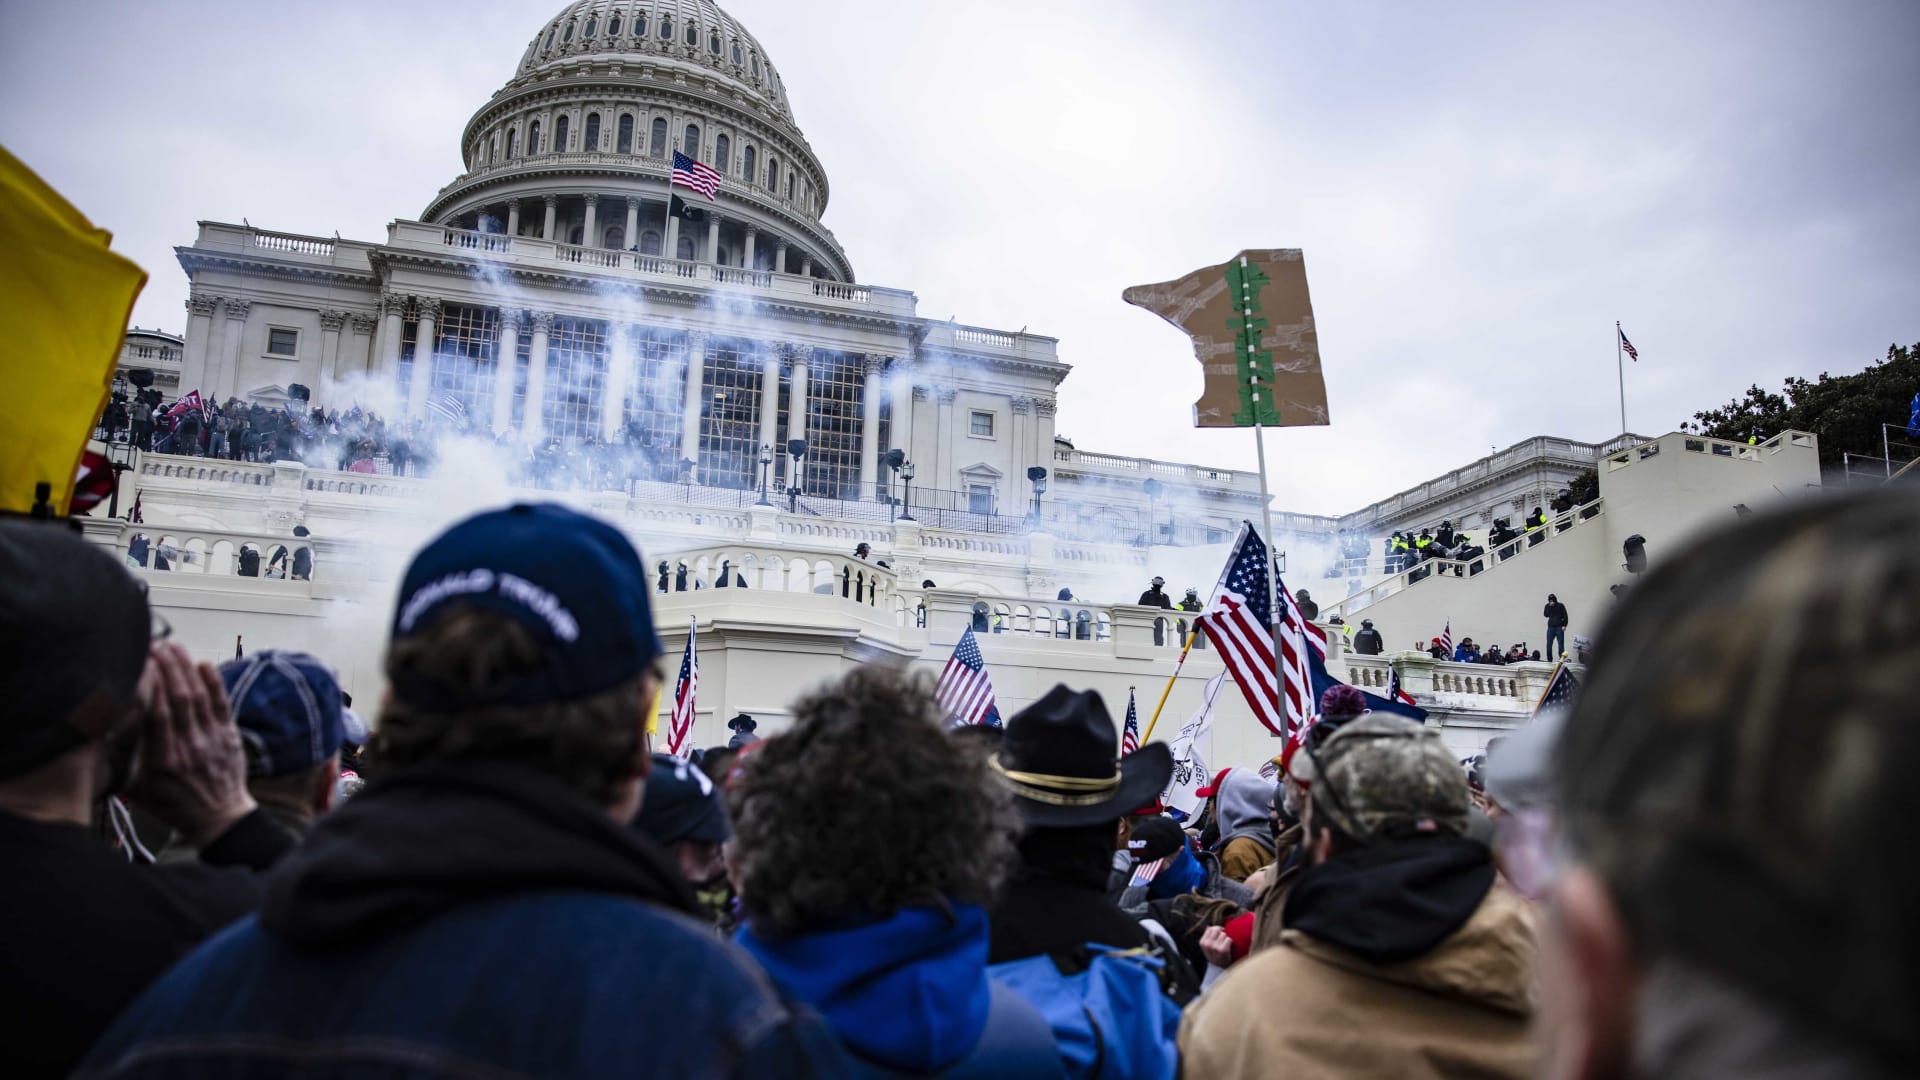 A mob enraged by the ratification of President-elect Joe Biden's Electoral College victory over President Trump in the 2020 election storms the U.S. Capitol following a rally led by Trump on January 6, 2021. 